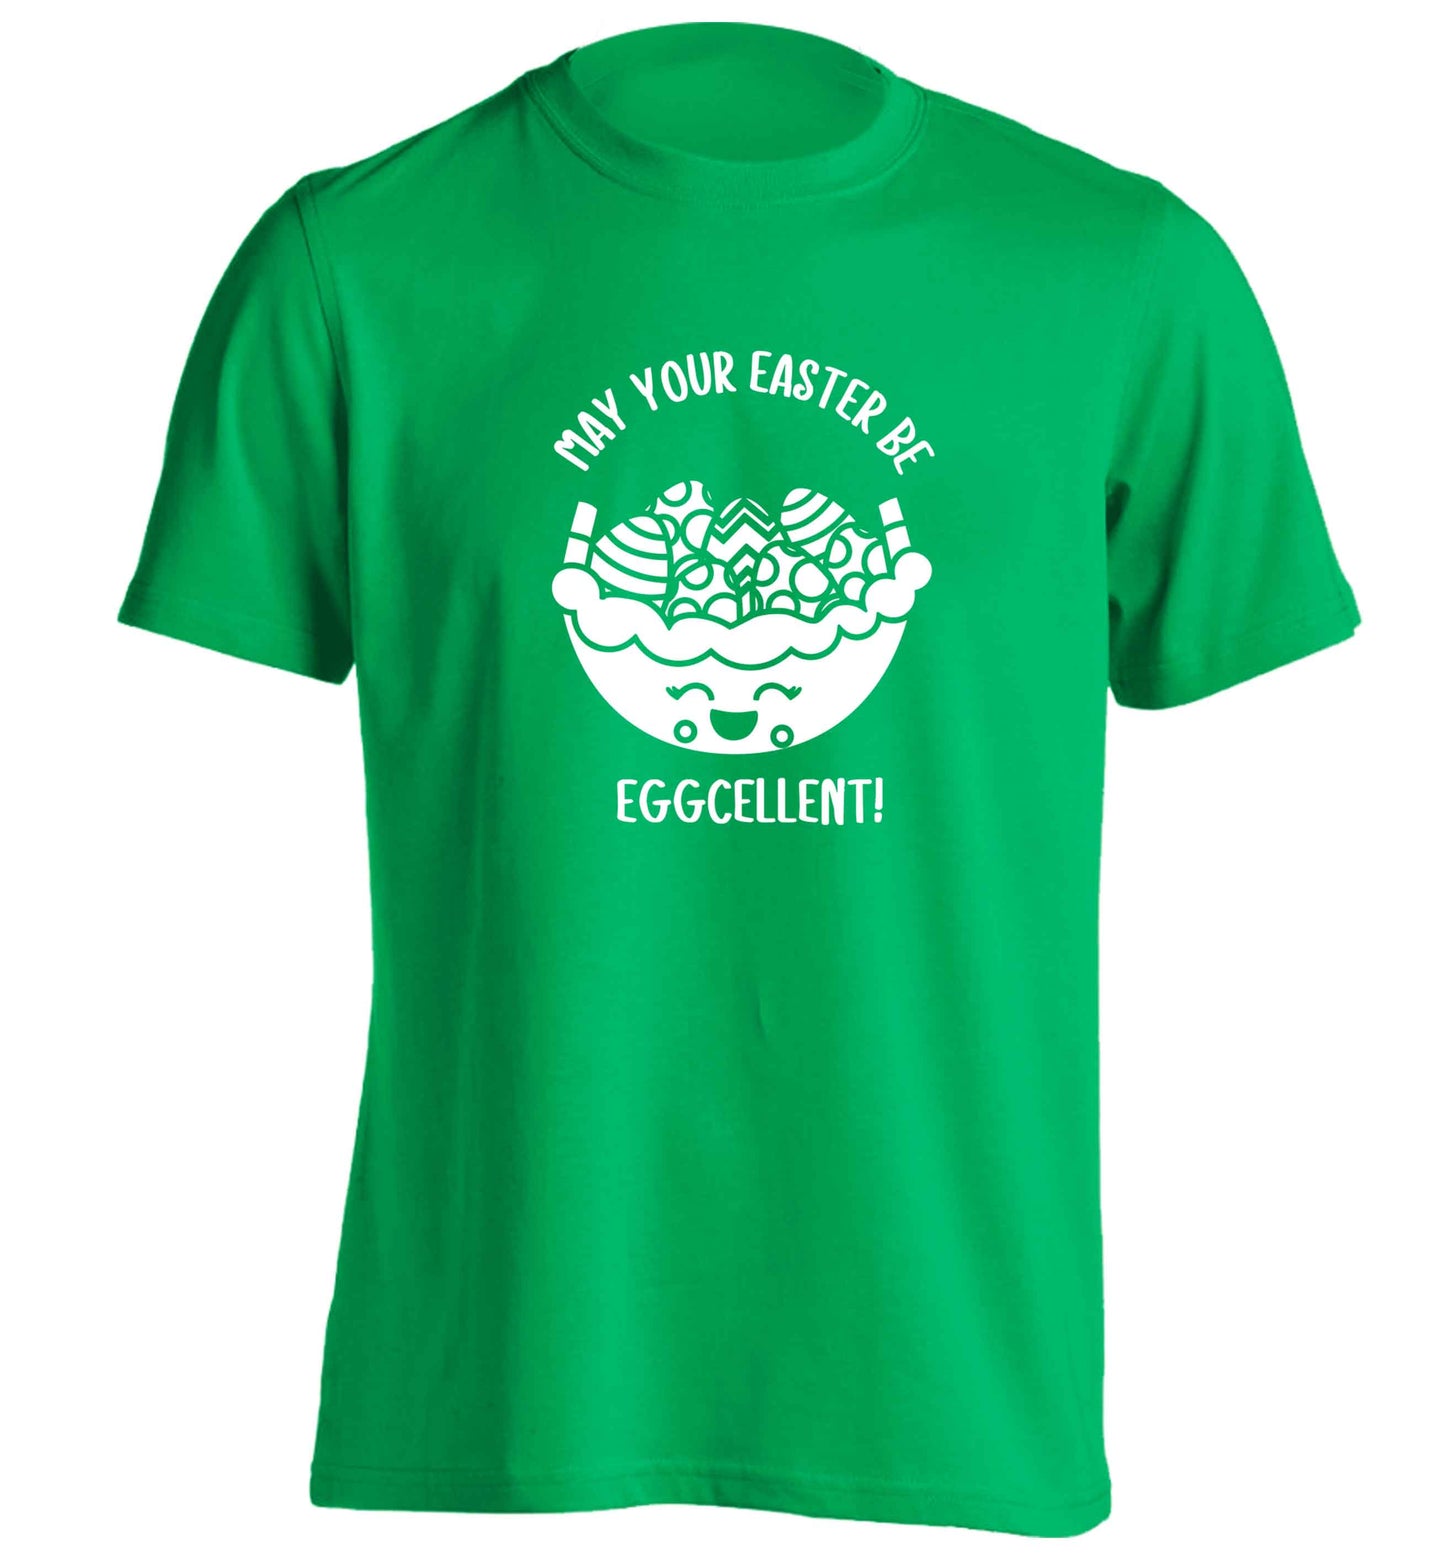 May your Easter be eggcellent adults unisex green Tshirt 2XL